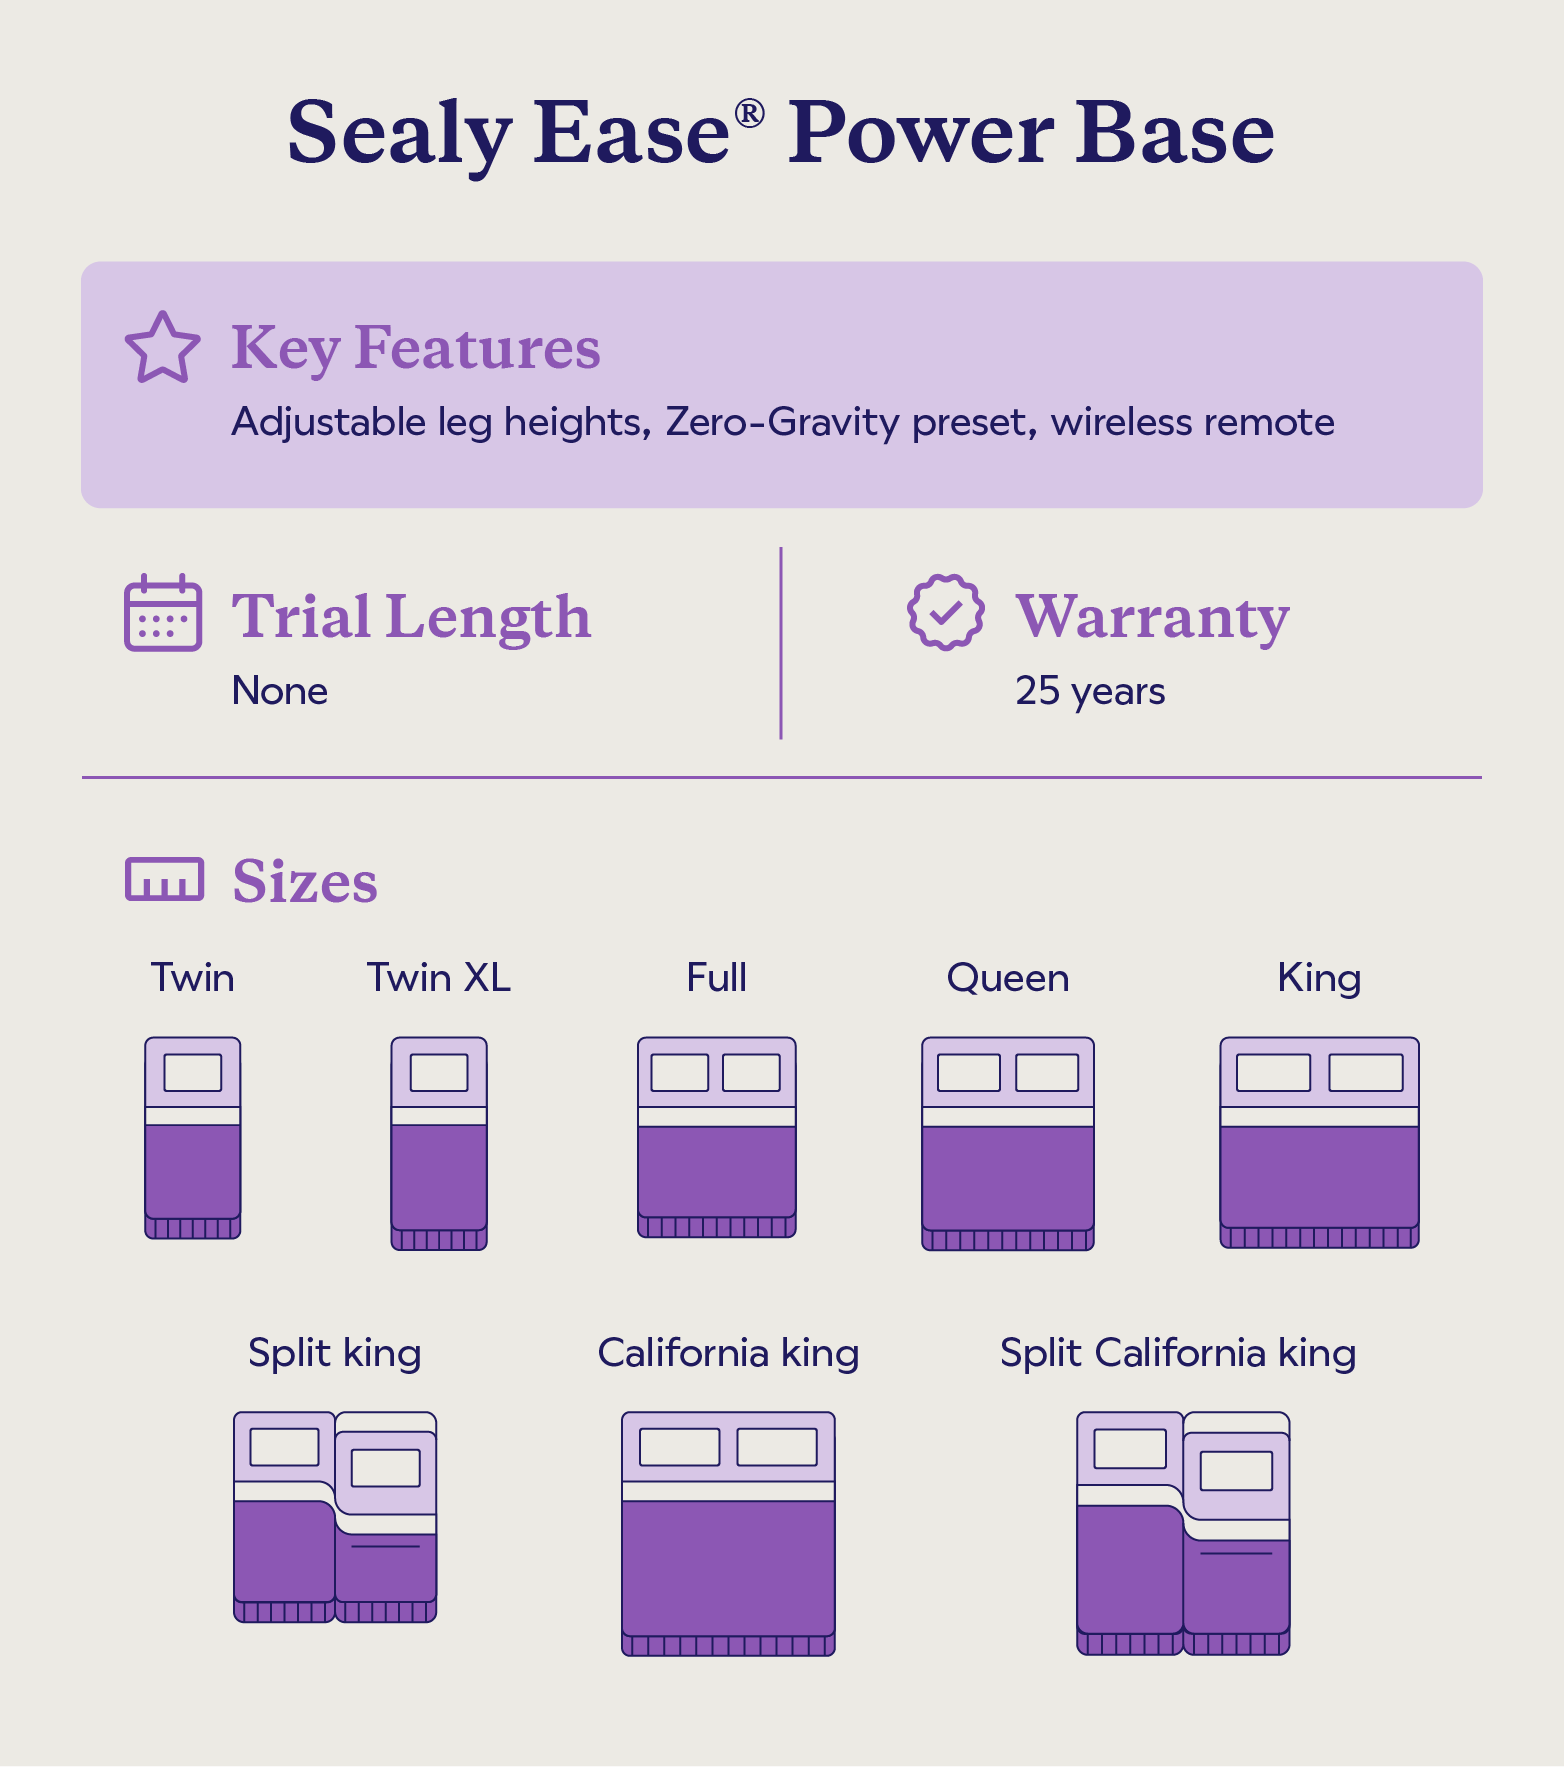 Key features and sizes of the Sealy Ease Power Base.